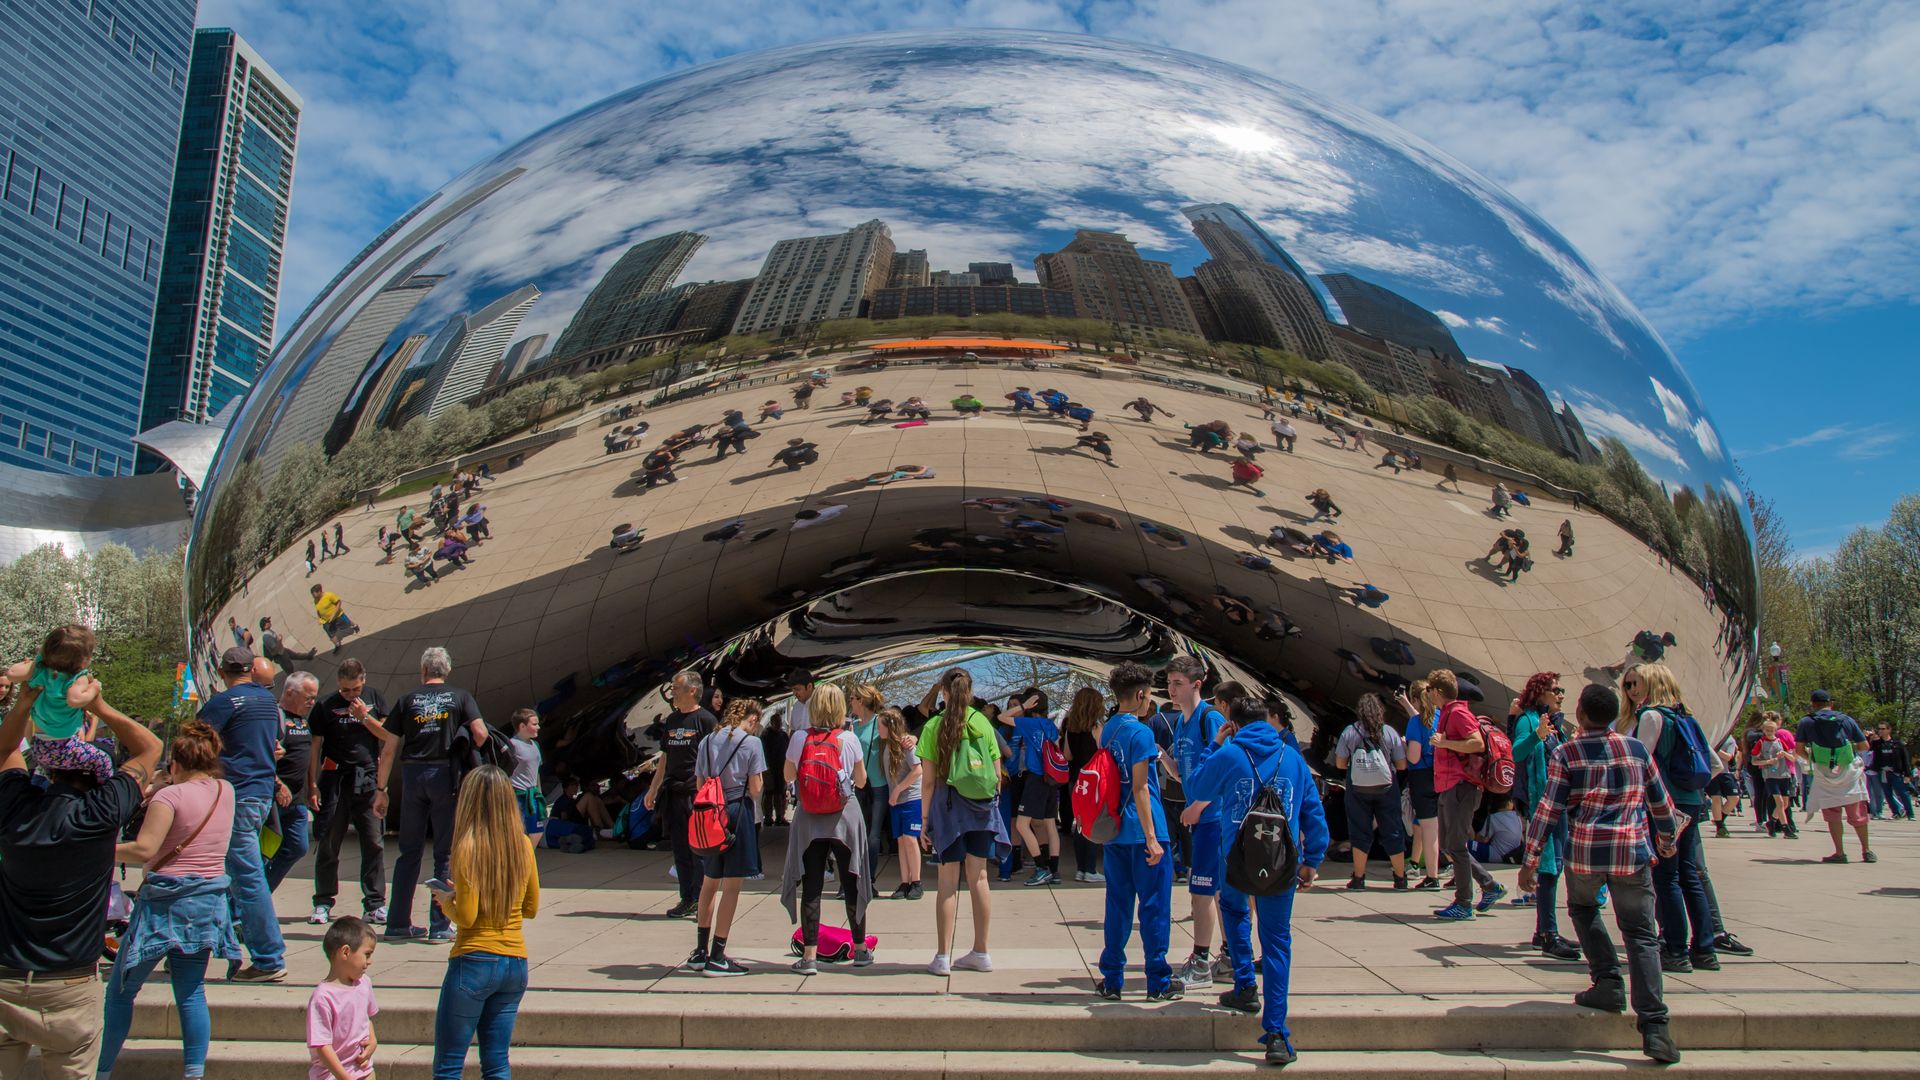 Chicago's Cloudgate, or "The Bean" with reflection of skyline and people standing around it.